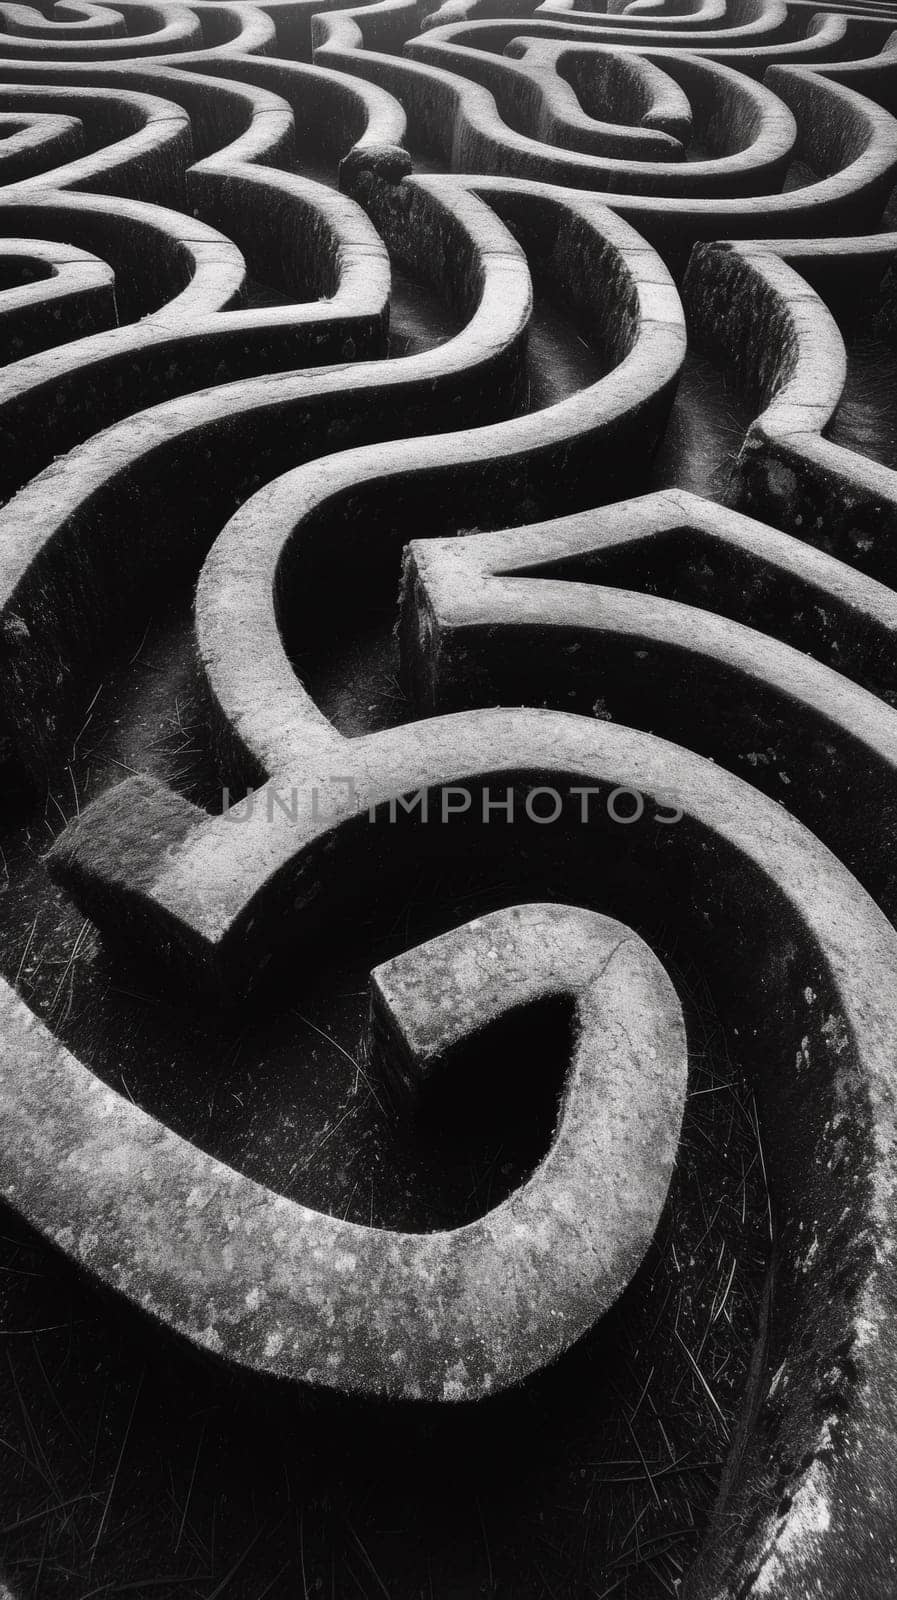 A black and white photo of a maze with many twists, AI by starush